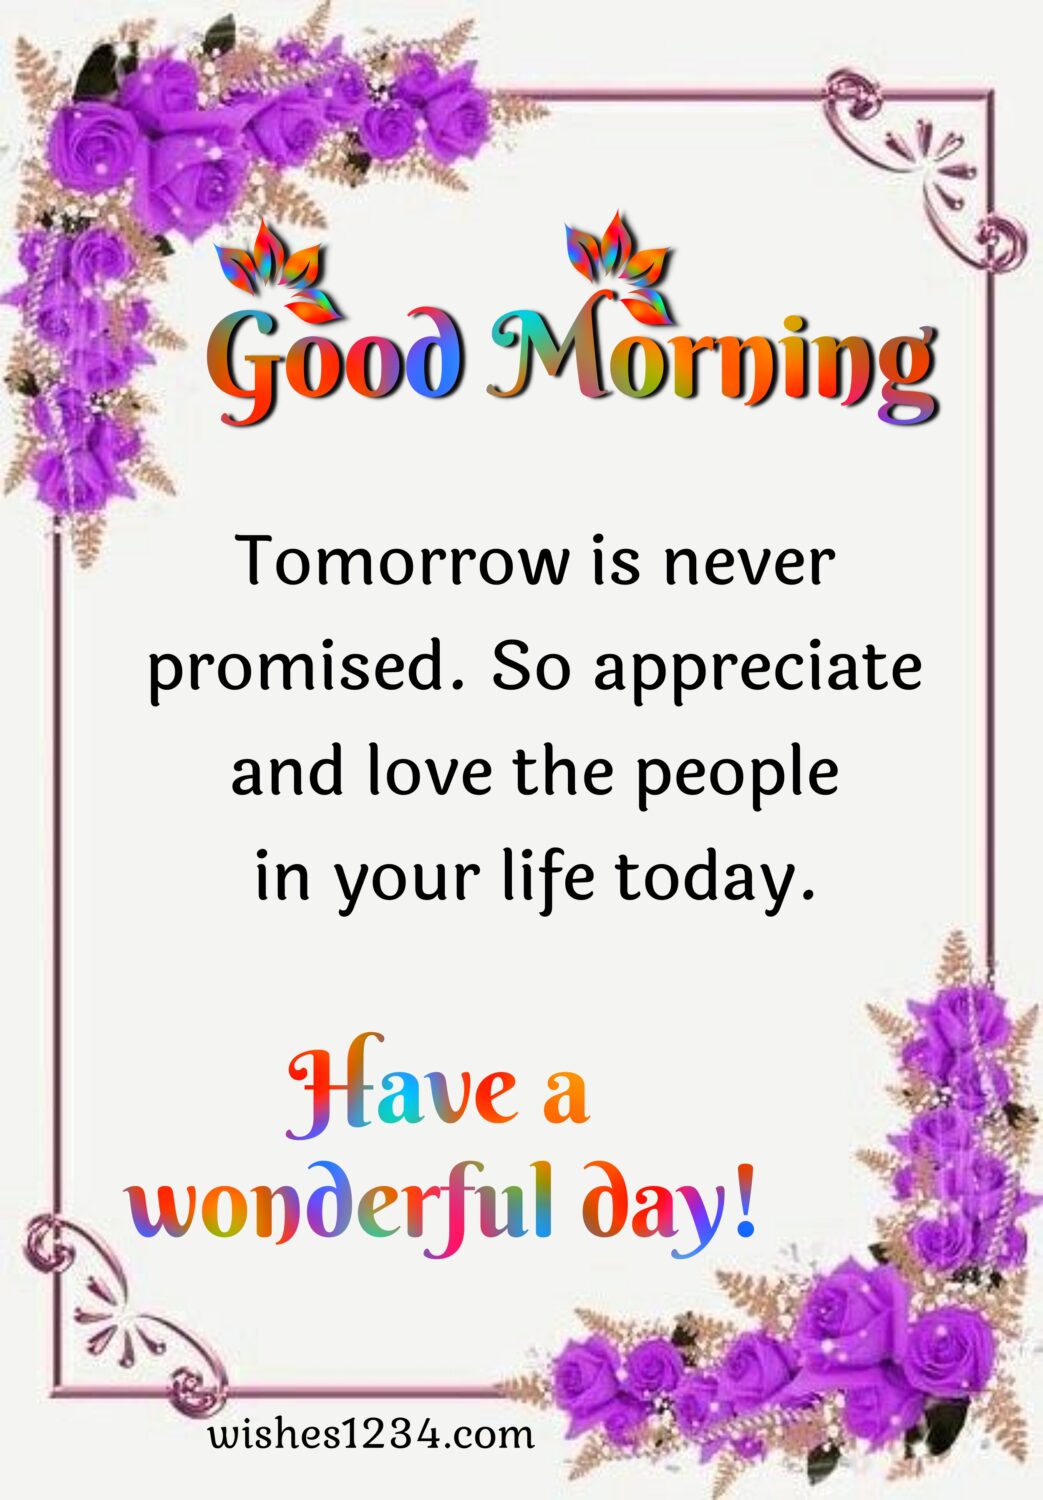 Good morning on card with purple flowers border, Good Morning Short Messages.